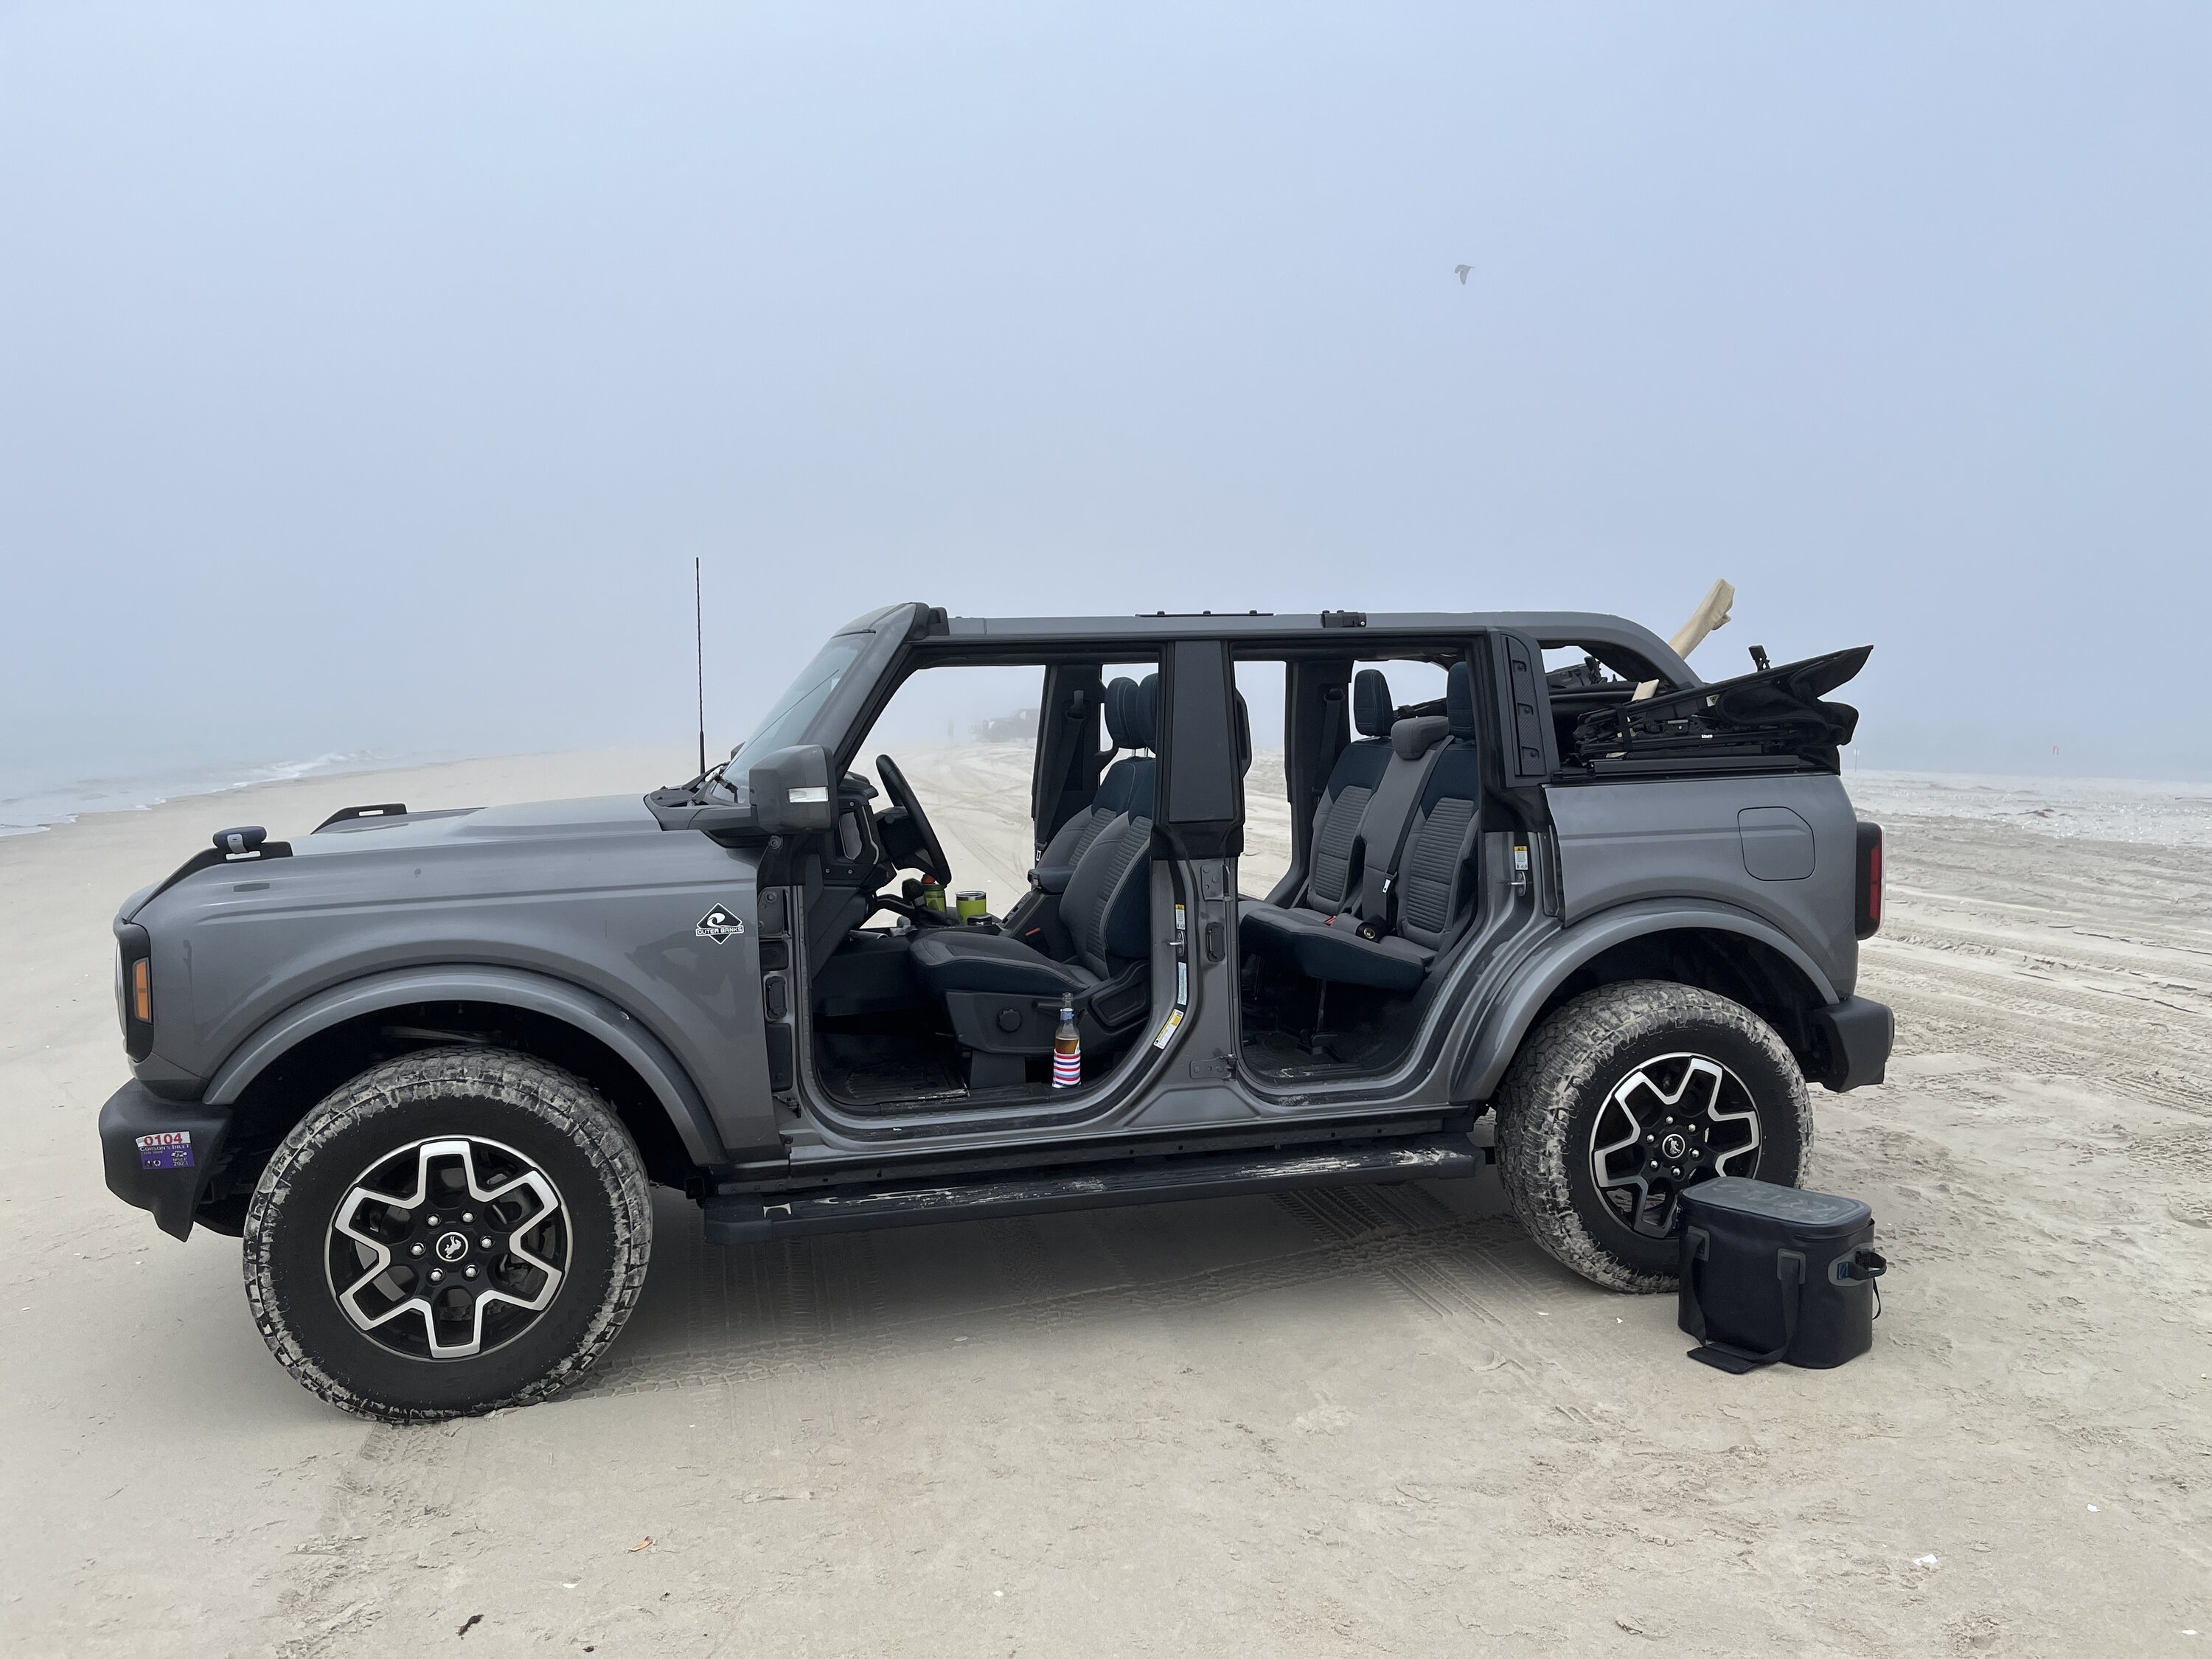 Ford Bronco Let’s see those Beach pics! beach camping (7)